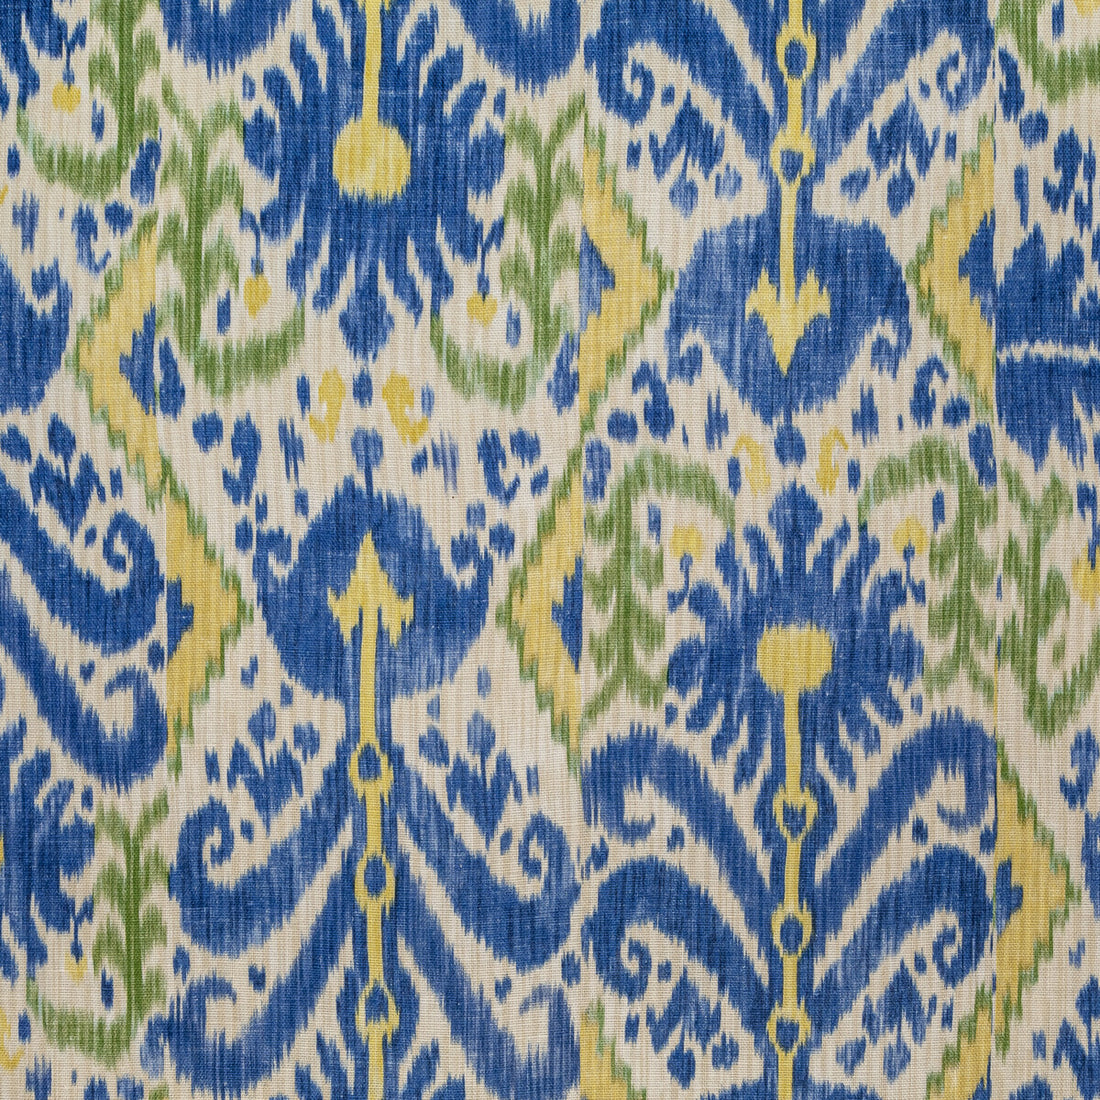 Kamara fabric in blue/yellow color - pattern BFC-3688.514.0 - by Lee Jofa in the Blithfield collection